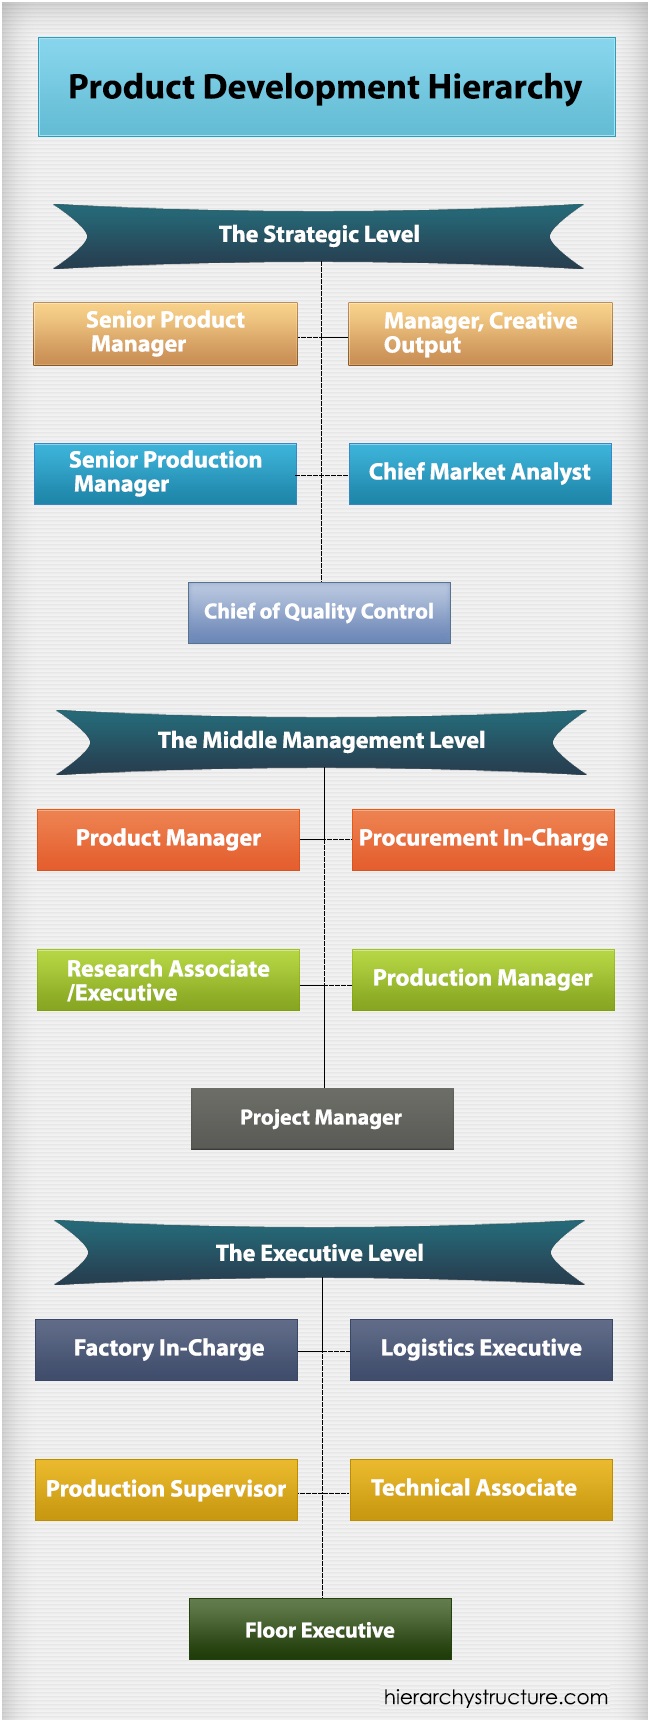 Product Development Hierarchy